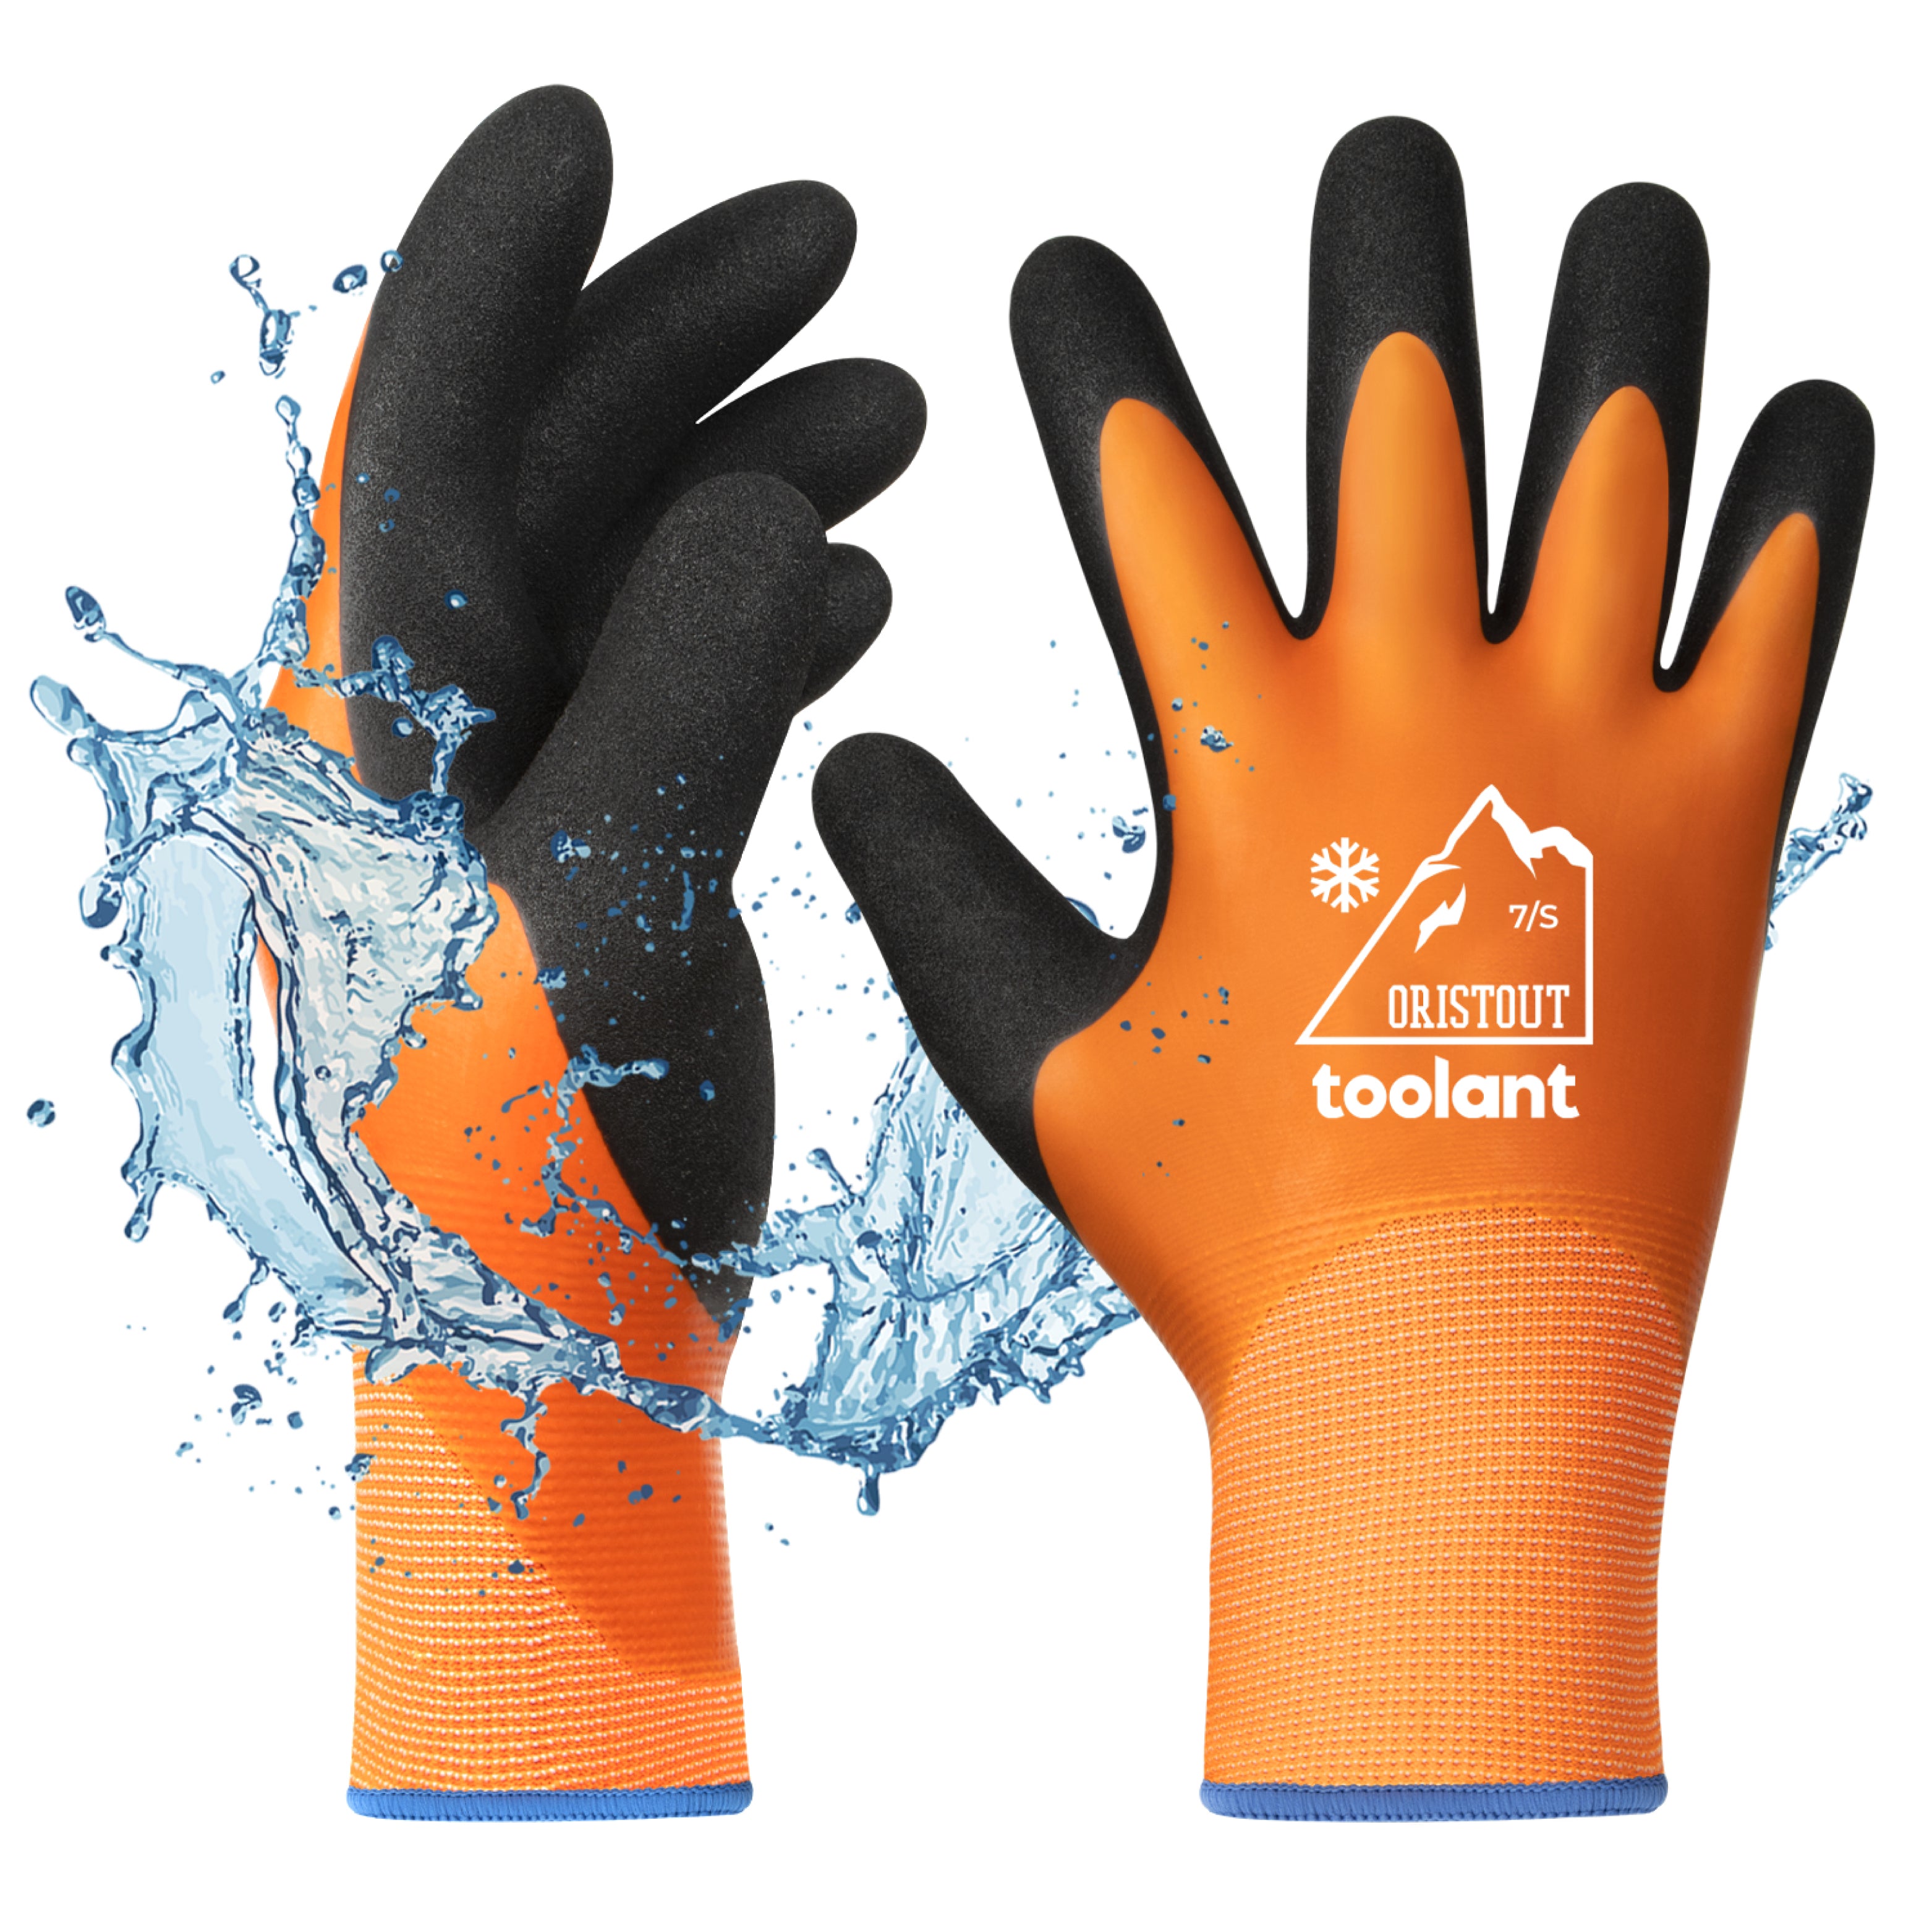 toolant Waterproof Gloves for Men and Women, Freezer Gloves with Grip, Double Nitrile Dipped for Extreme Oil Repellent, for Construction, Mud